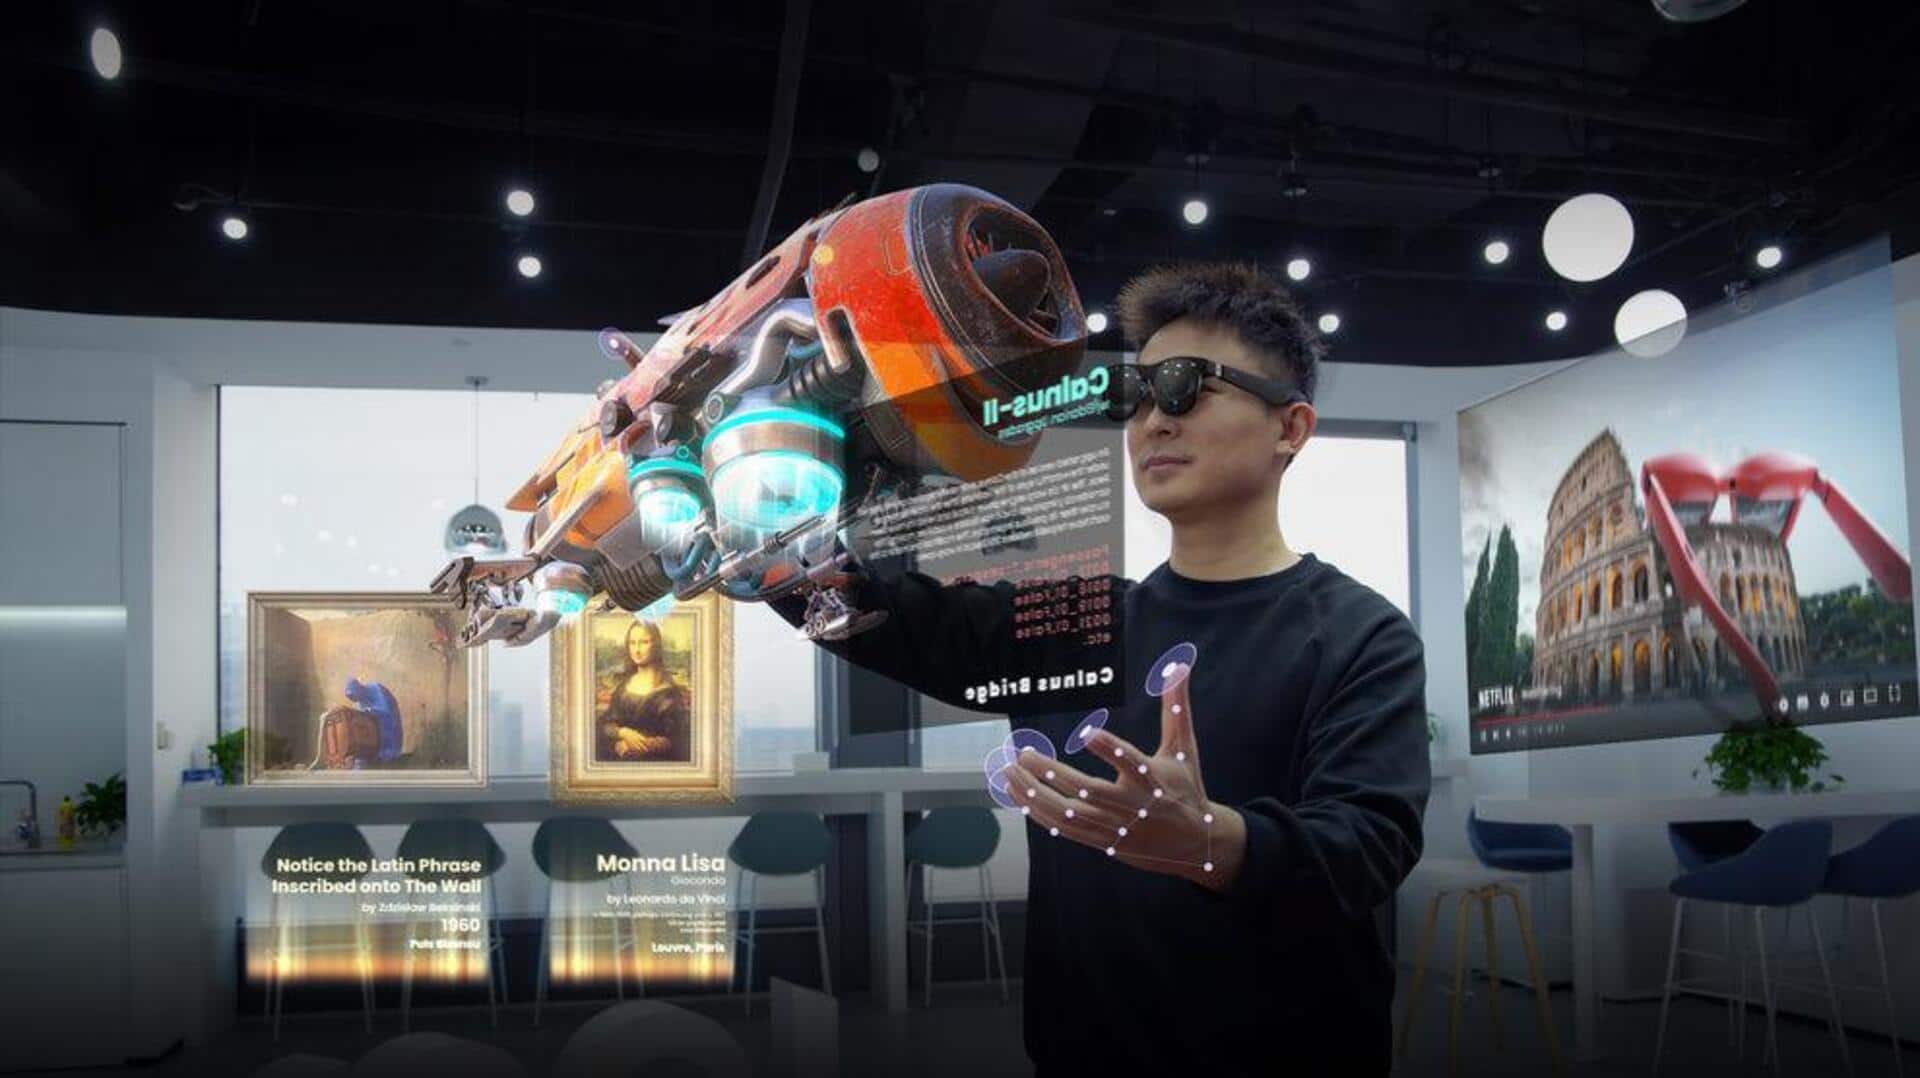 Xreal takes on Meta, Apple with its latest AR glasses